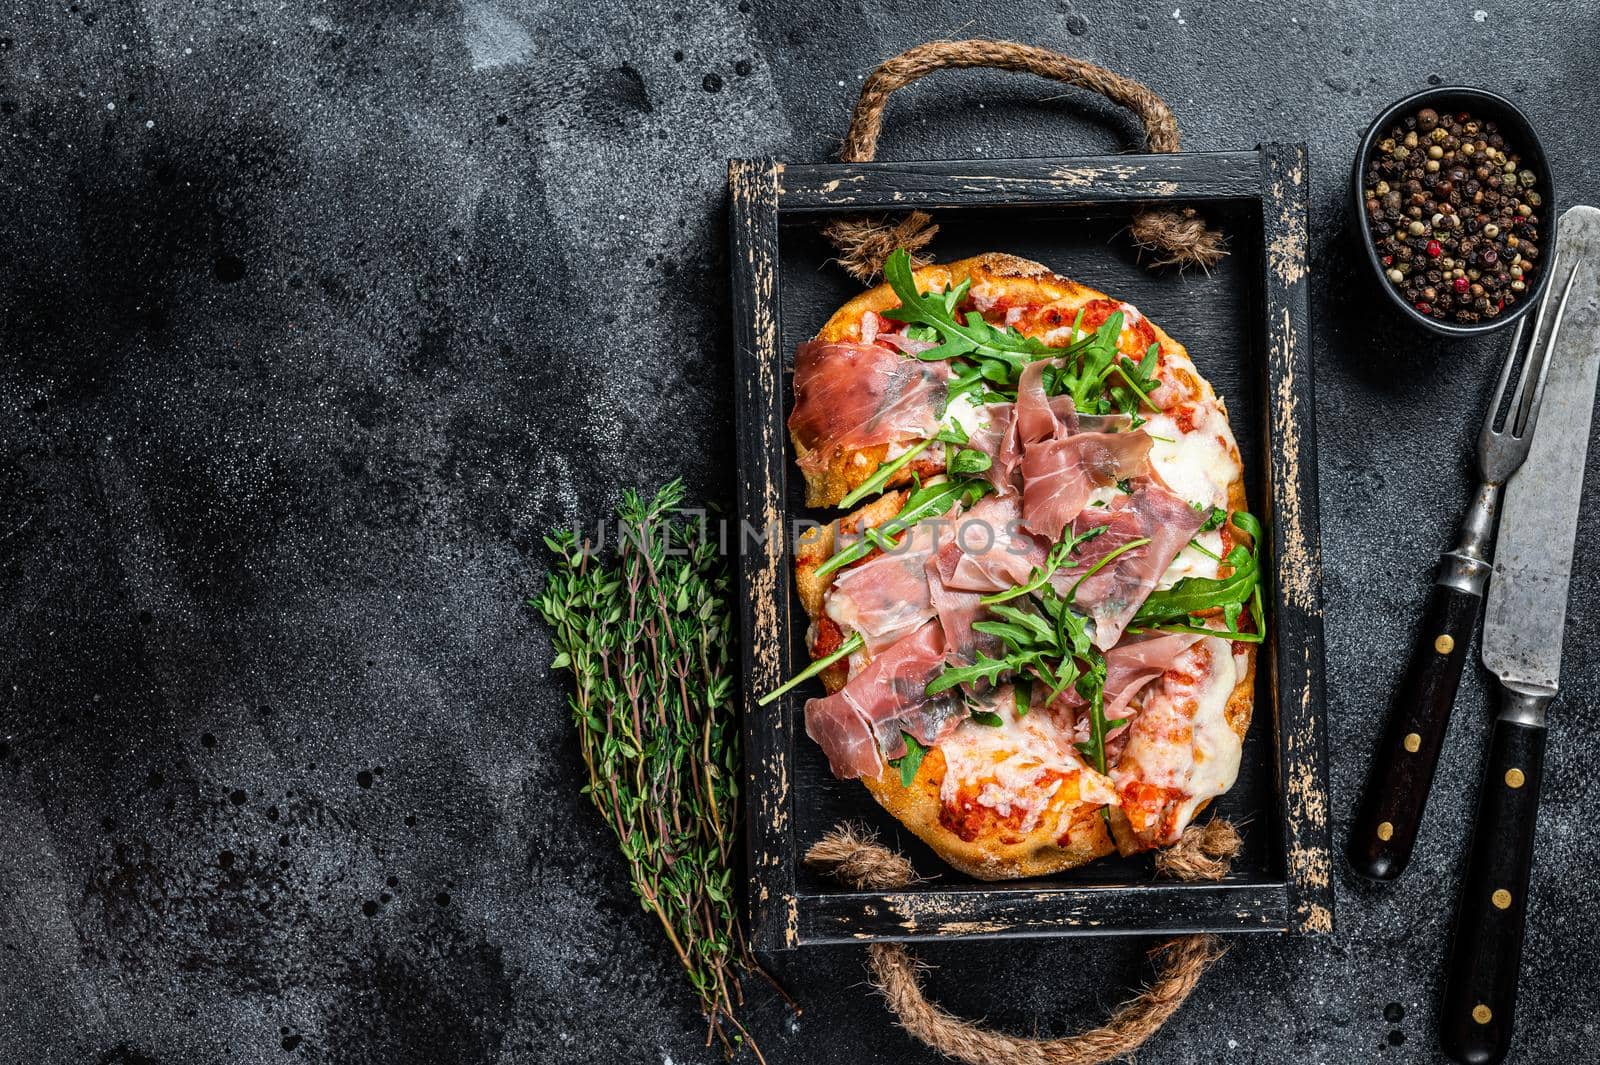 Italian Pizza with prosciutto parma ham, arugula salad and cheese in a rustic wooden tray. Black background. Top view. Copy space by Composter